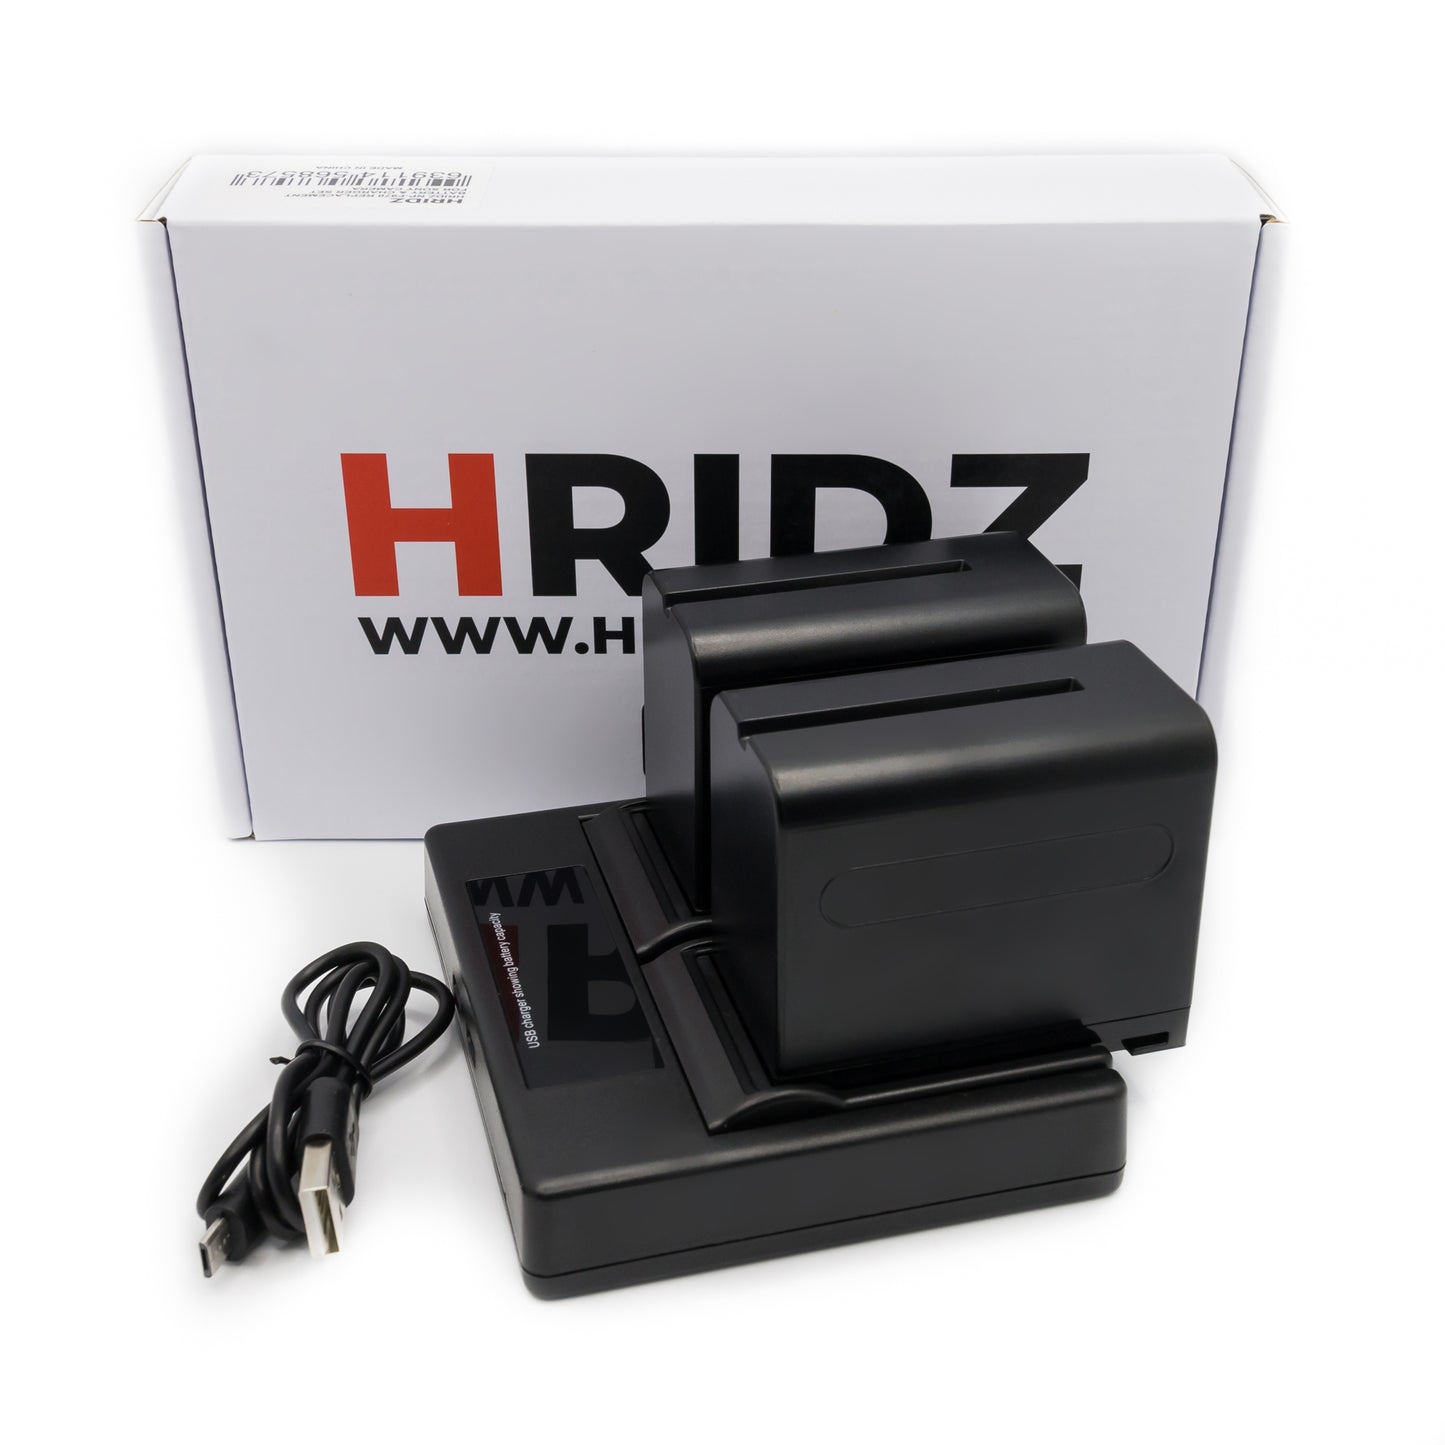 HRIDZ Combo Pack 6600mAh NP-F970 Batteries and Charger set replaces Sony NP-F battery